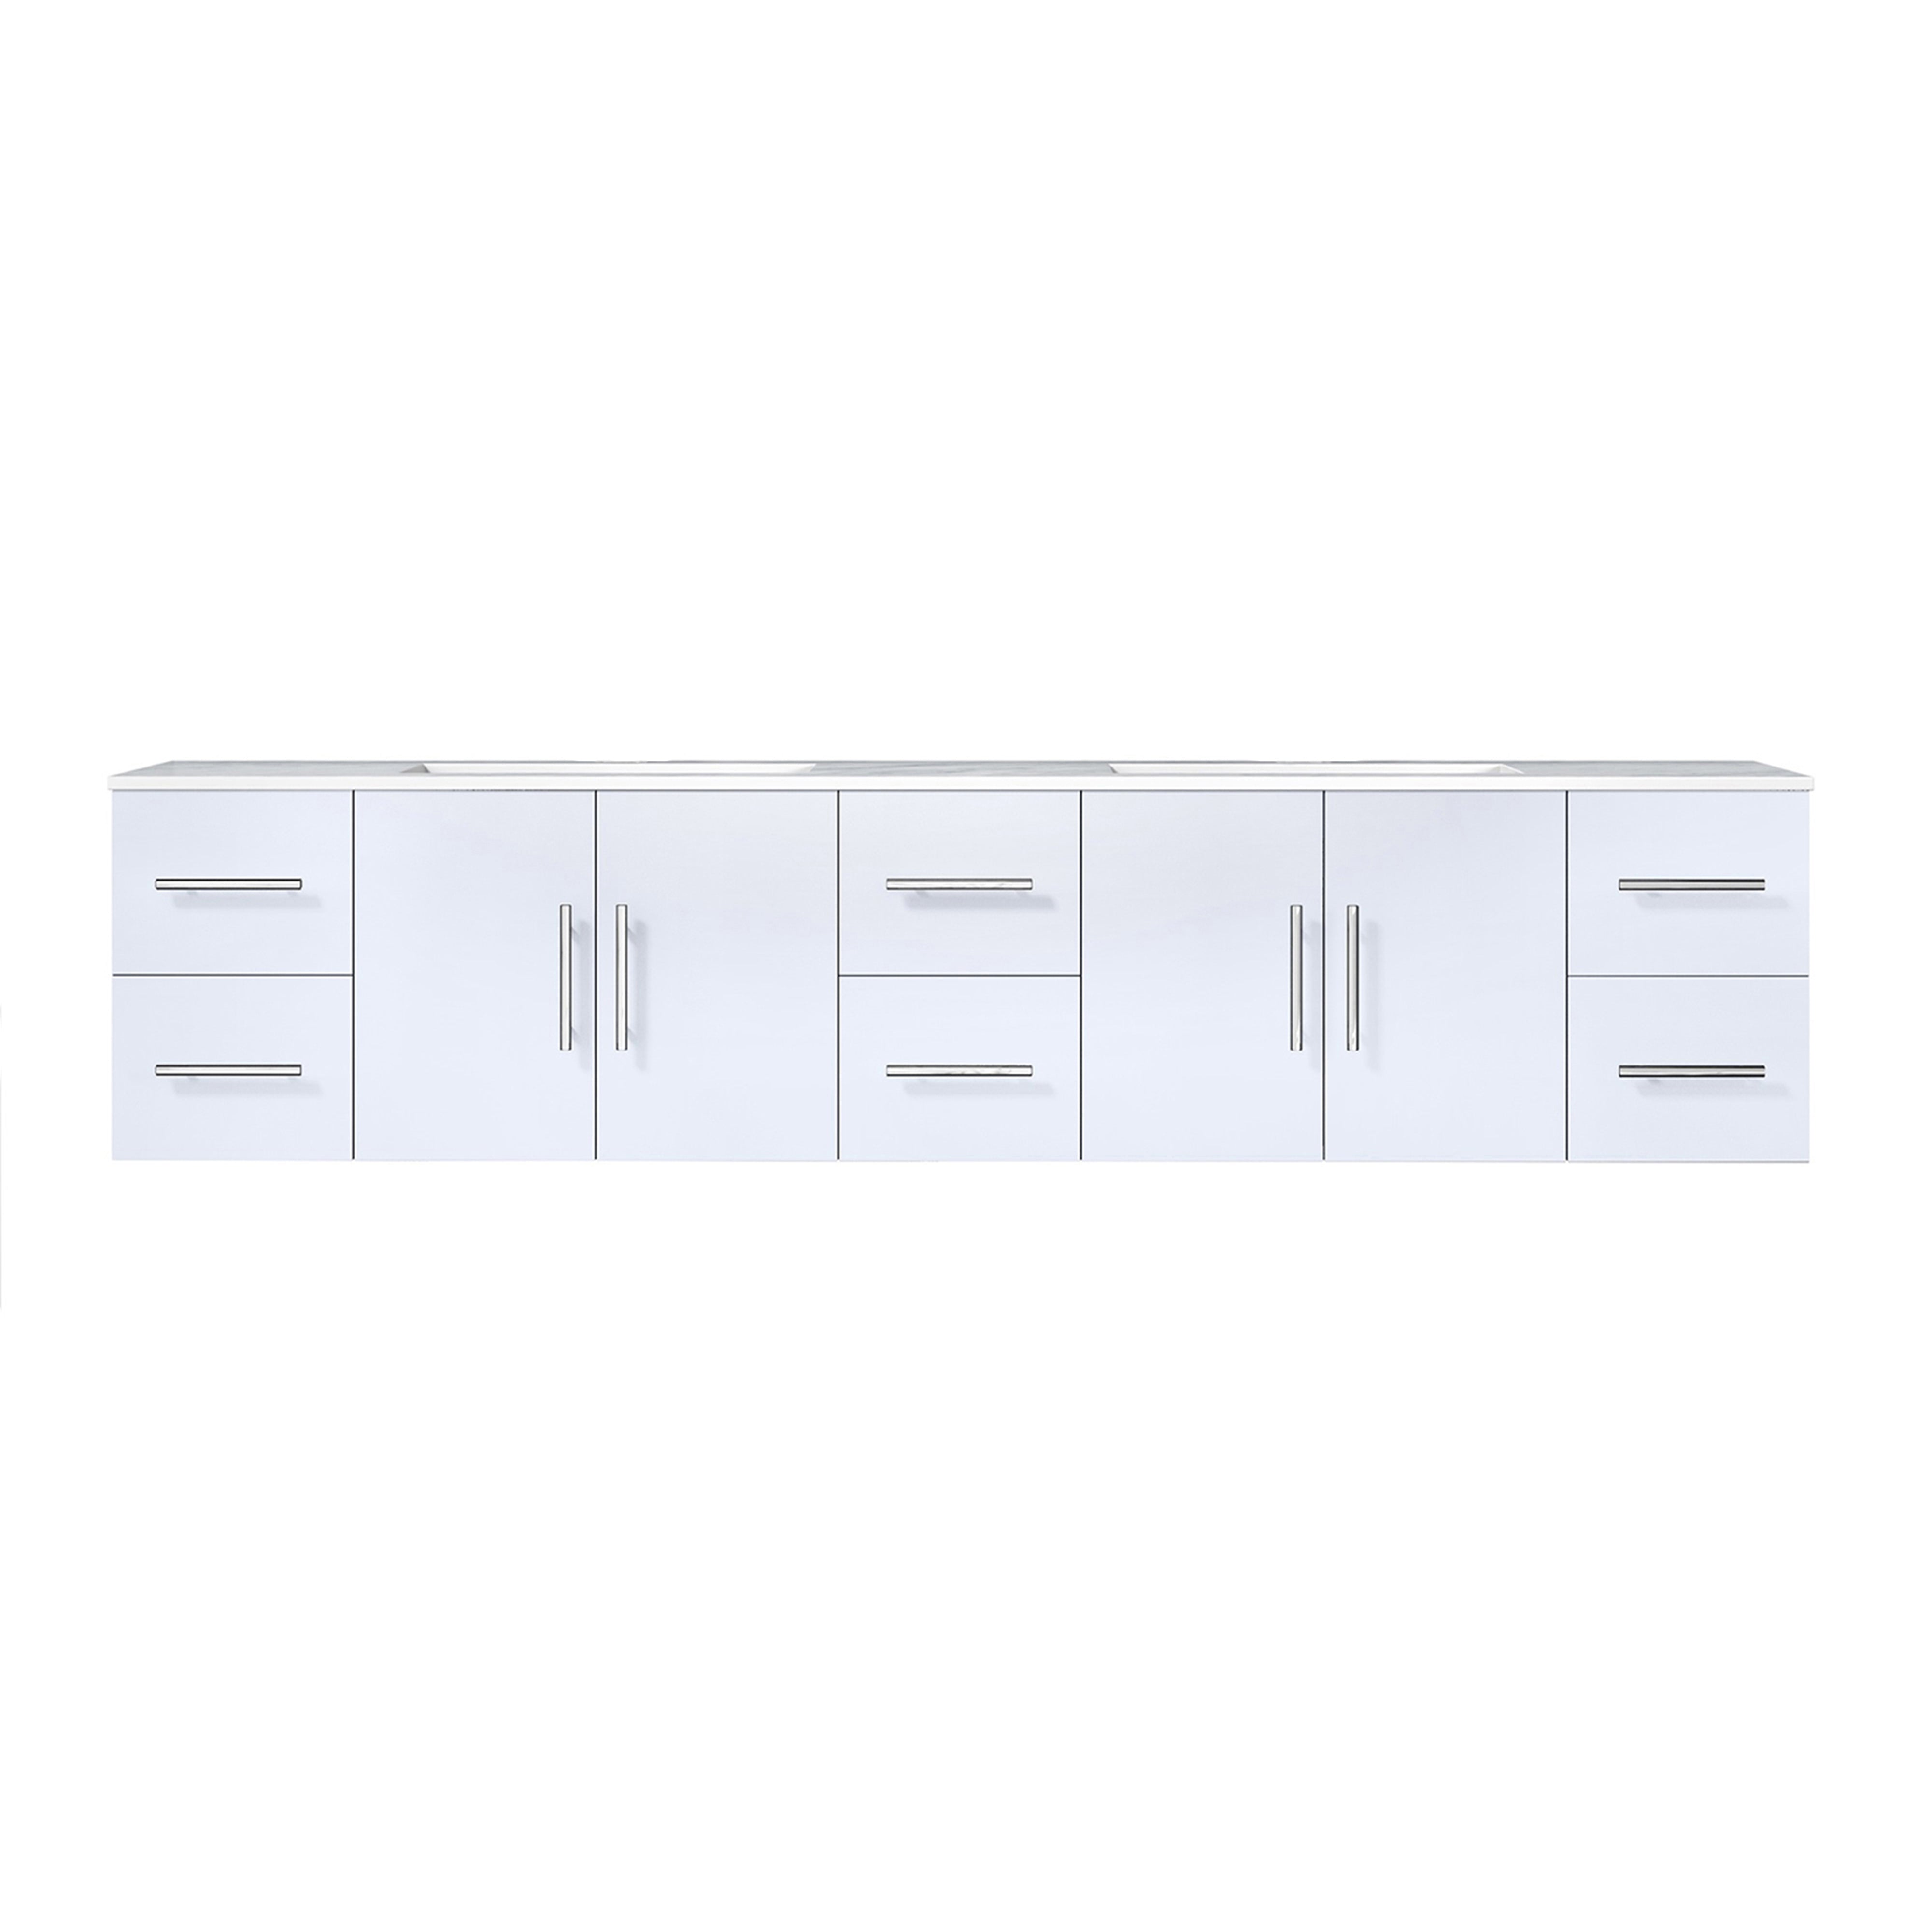 Lexora Geneva LG192284DMDS000 84" Double Wall Mounted Bathroom Vanity in Glossy White with White Carrara Marble, White Rectangle Sinks, Front View